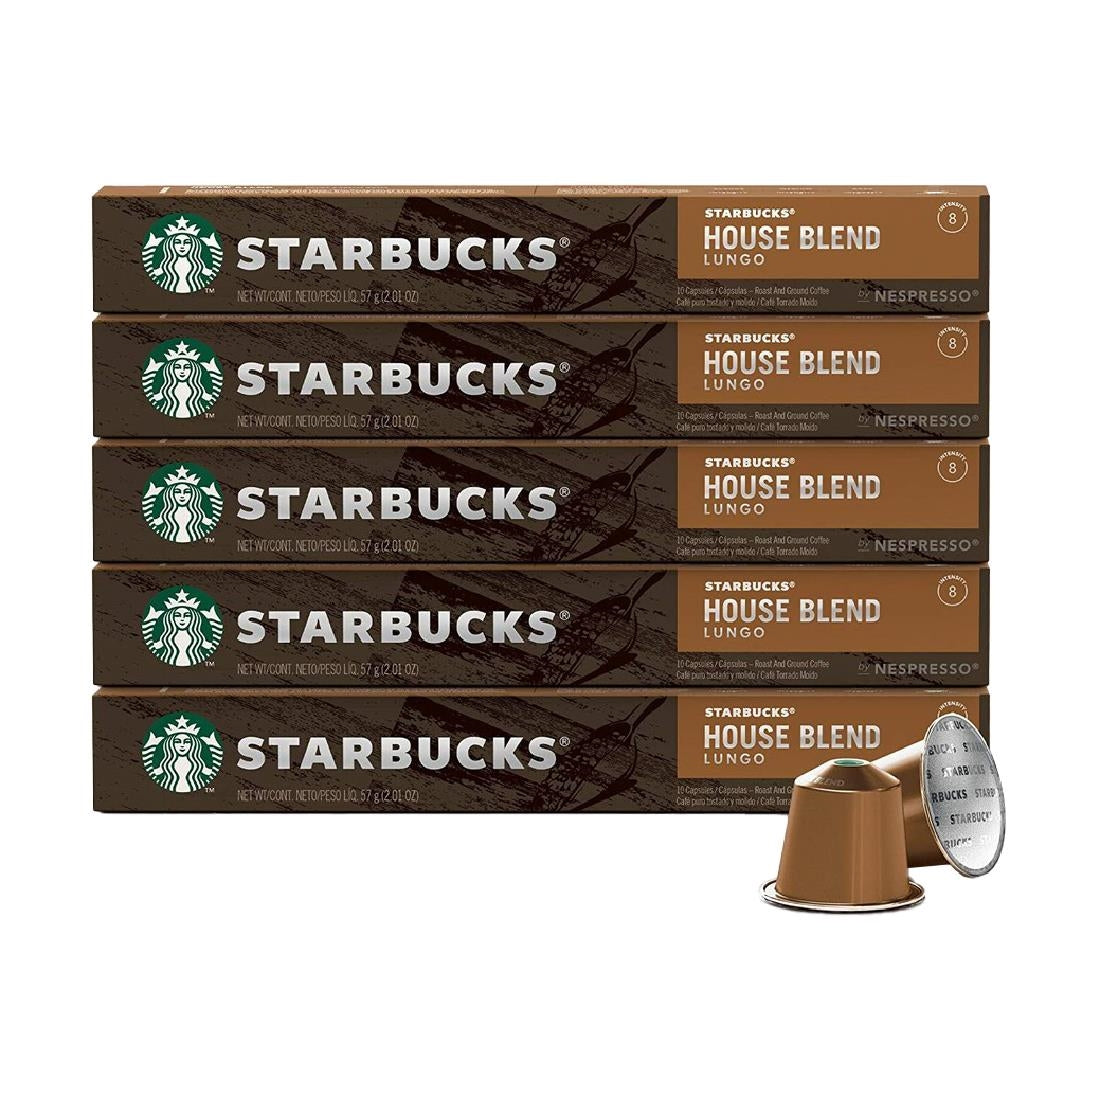 CH297 Starbucks House Blend Lungo Nespresso Coffee Pods (12 x 10) JD Catering Equipment Solutions Ltd